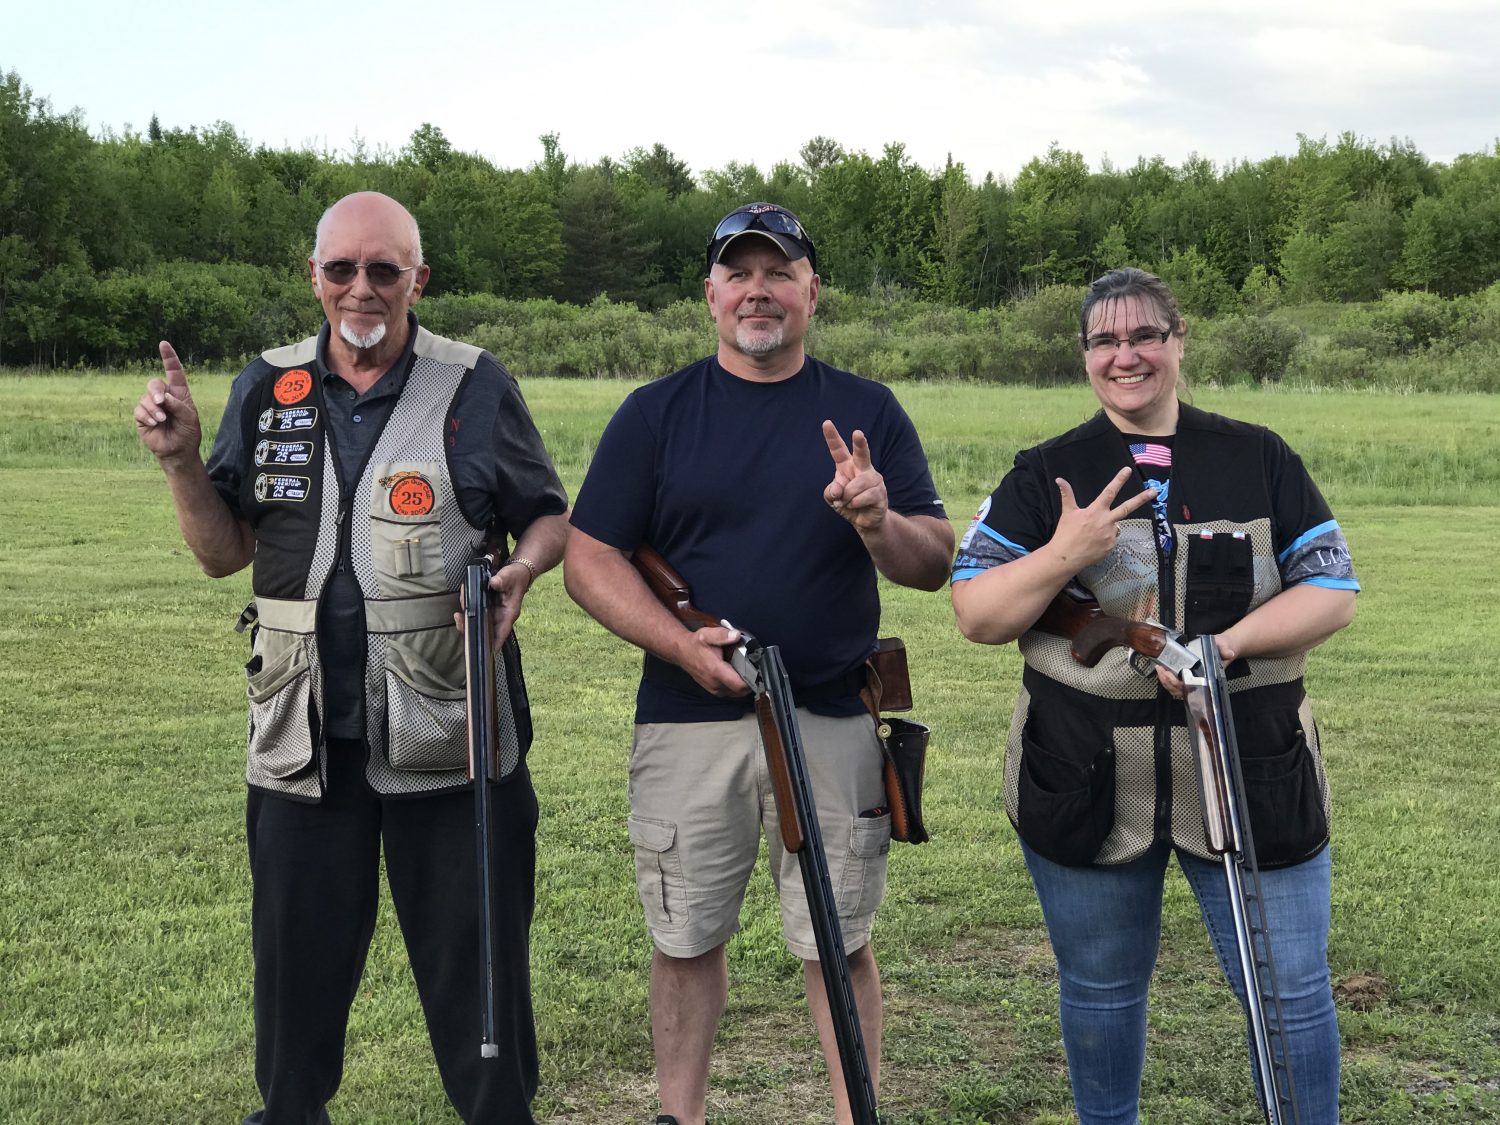 Trap Team Coaches raise funds for charity, shoot for “Top Gun” bragging  rights - Merrill Foto News